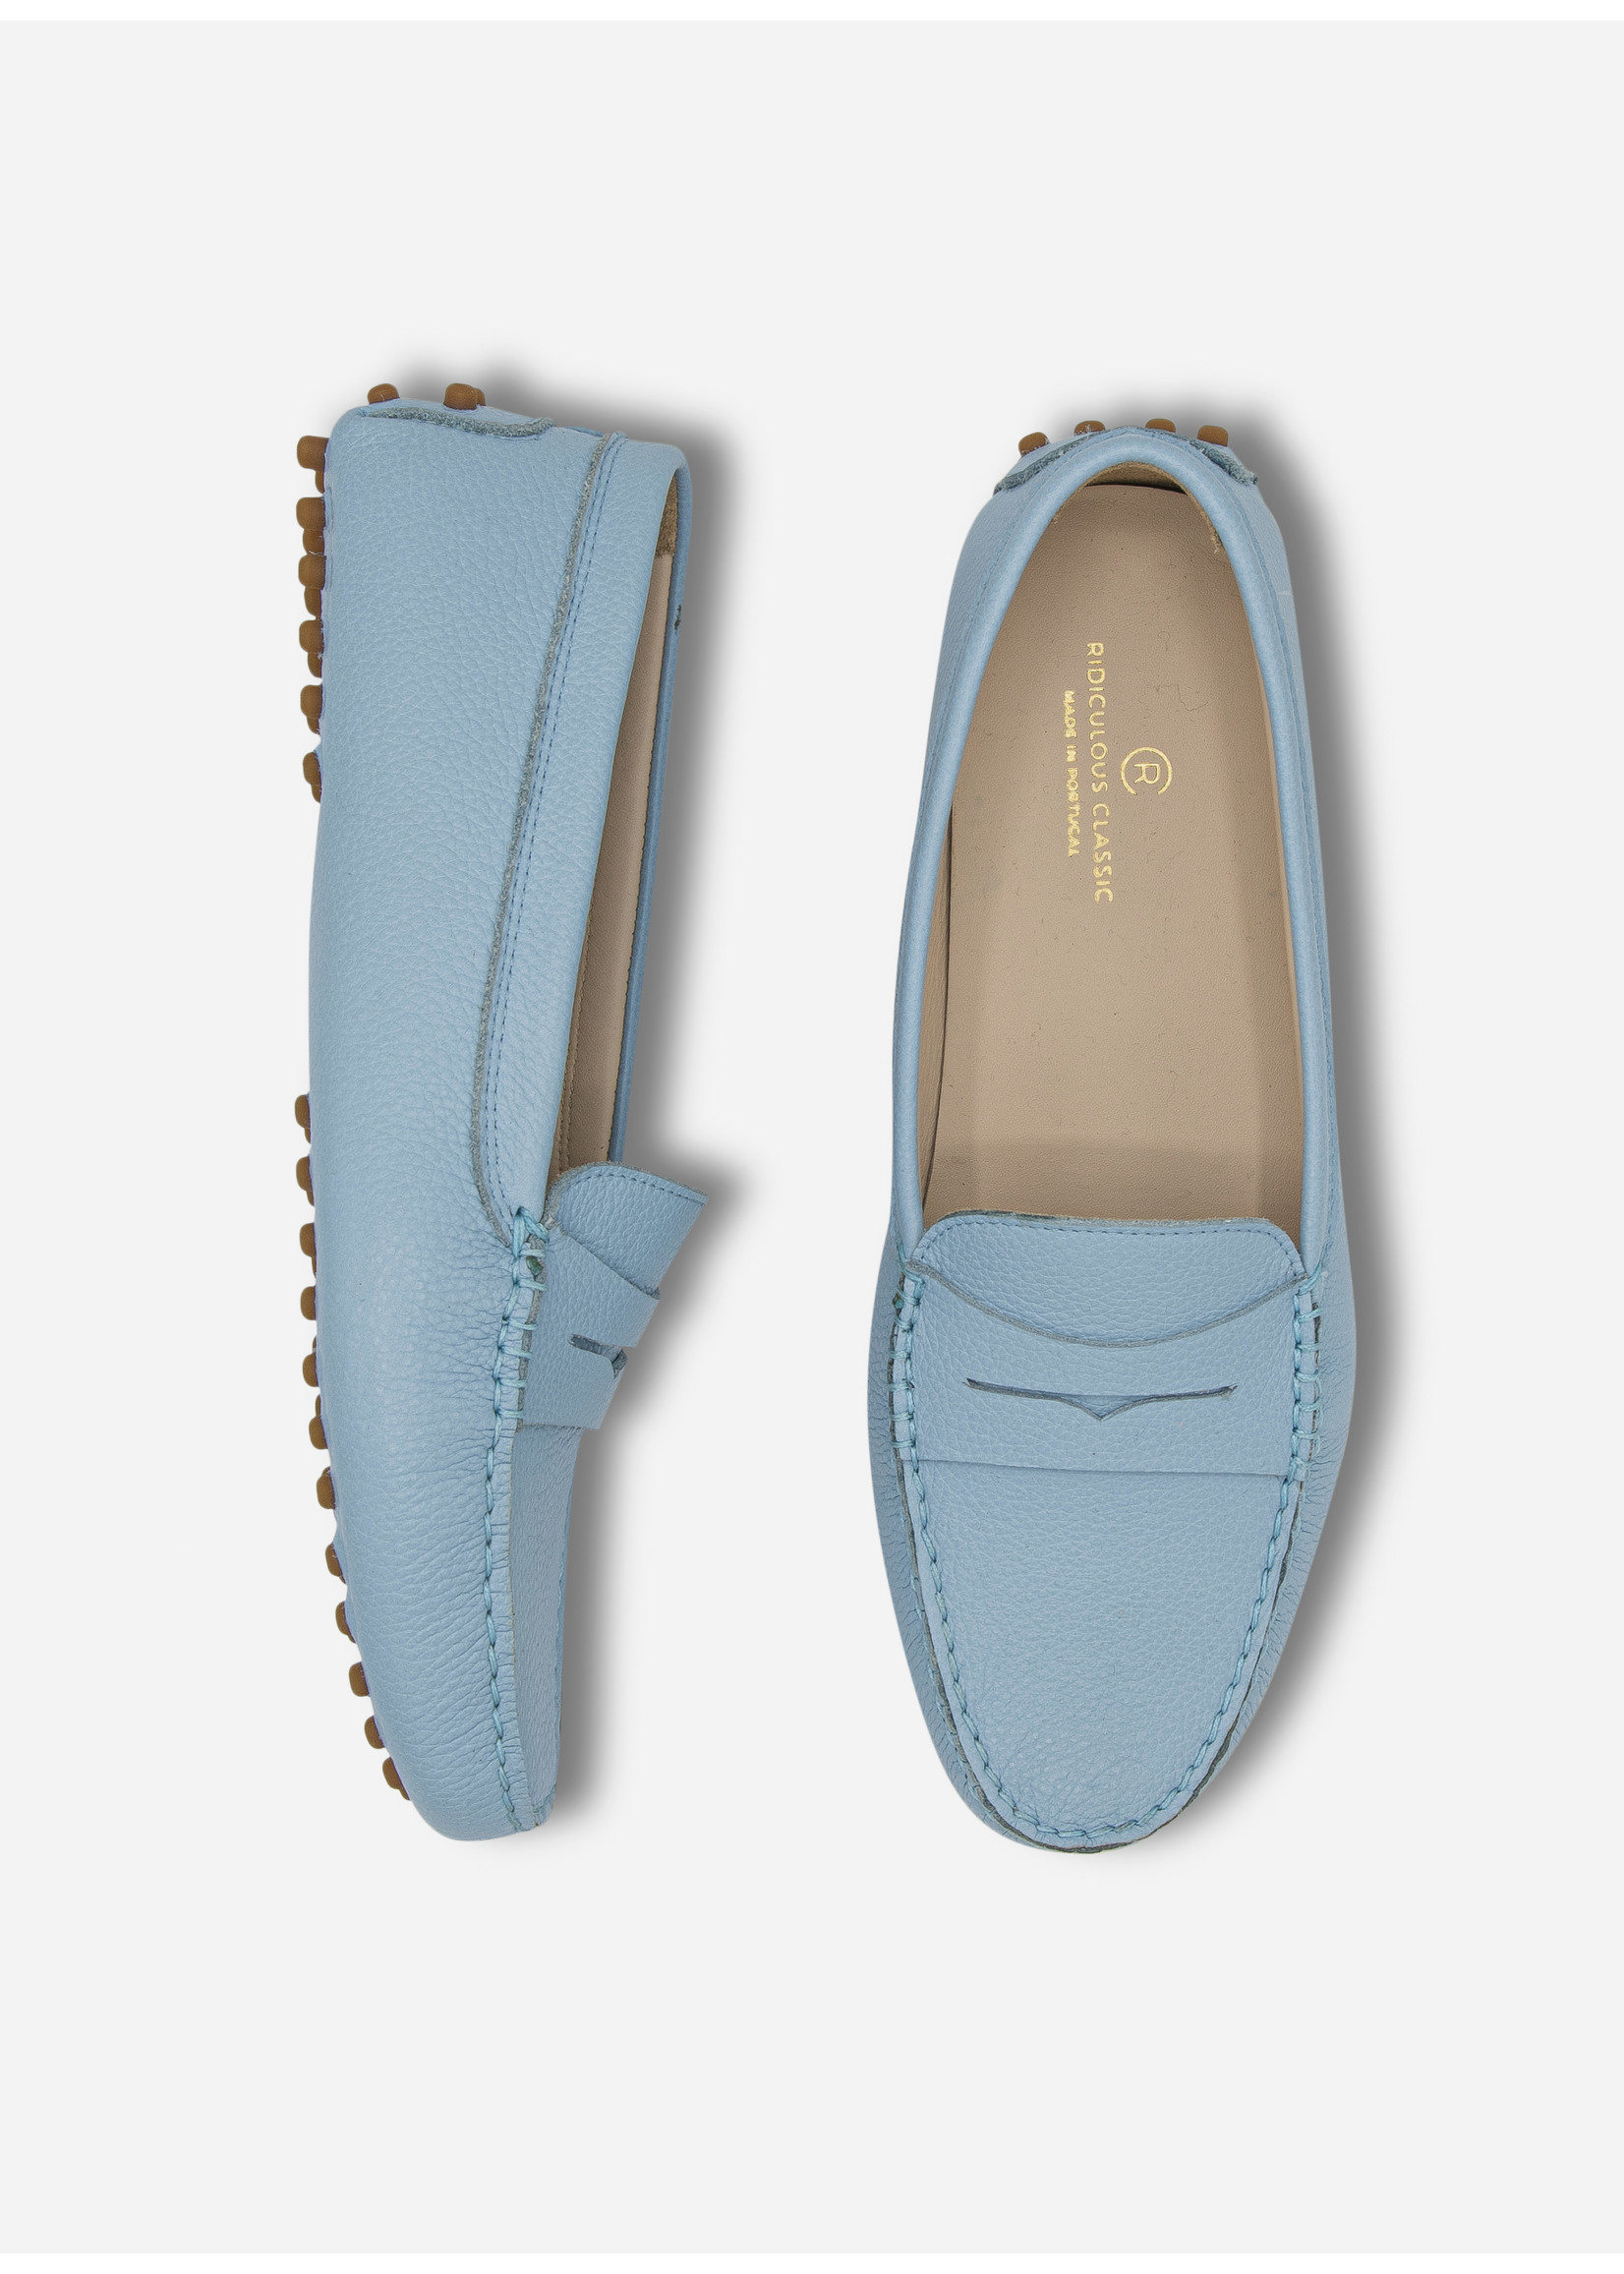 Ridiculous Classic Mocca Light Blue